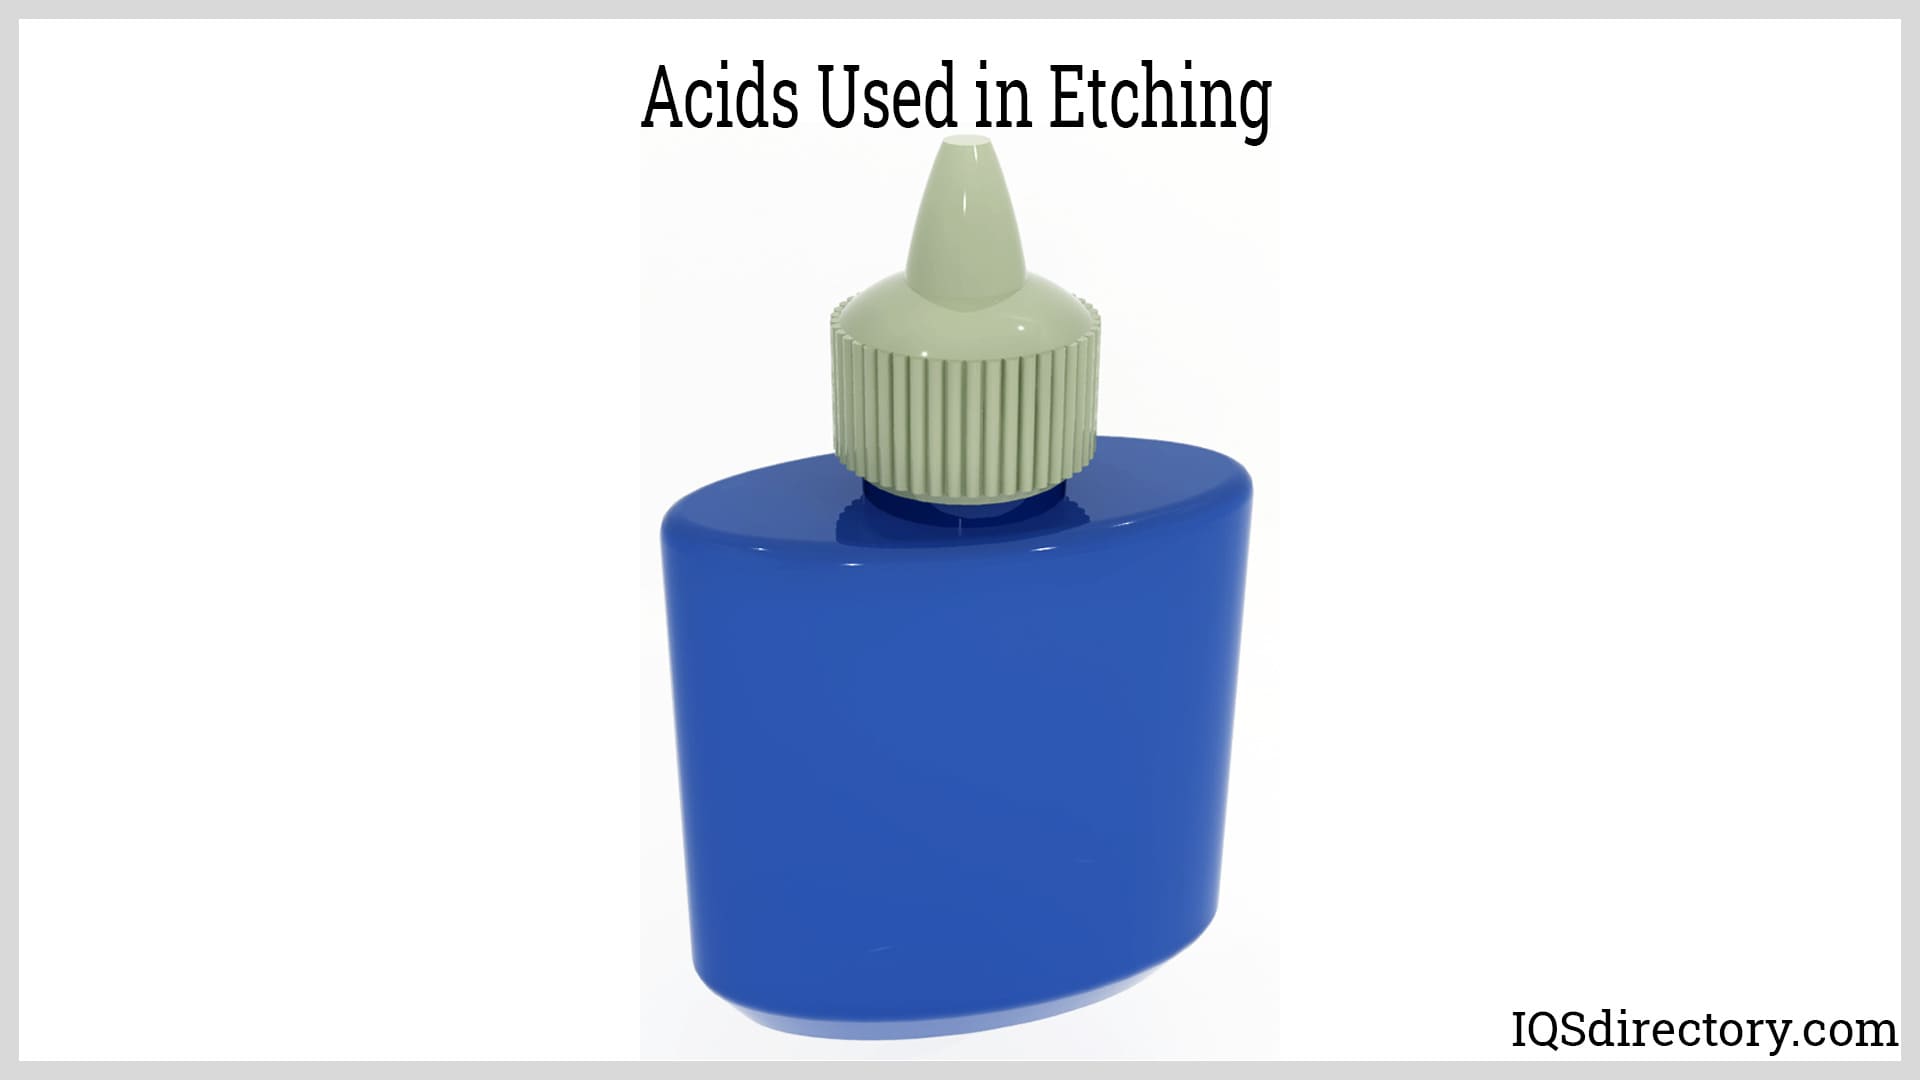 Acids Used in Etching